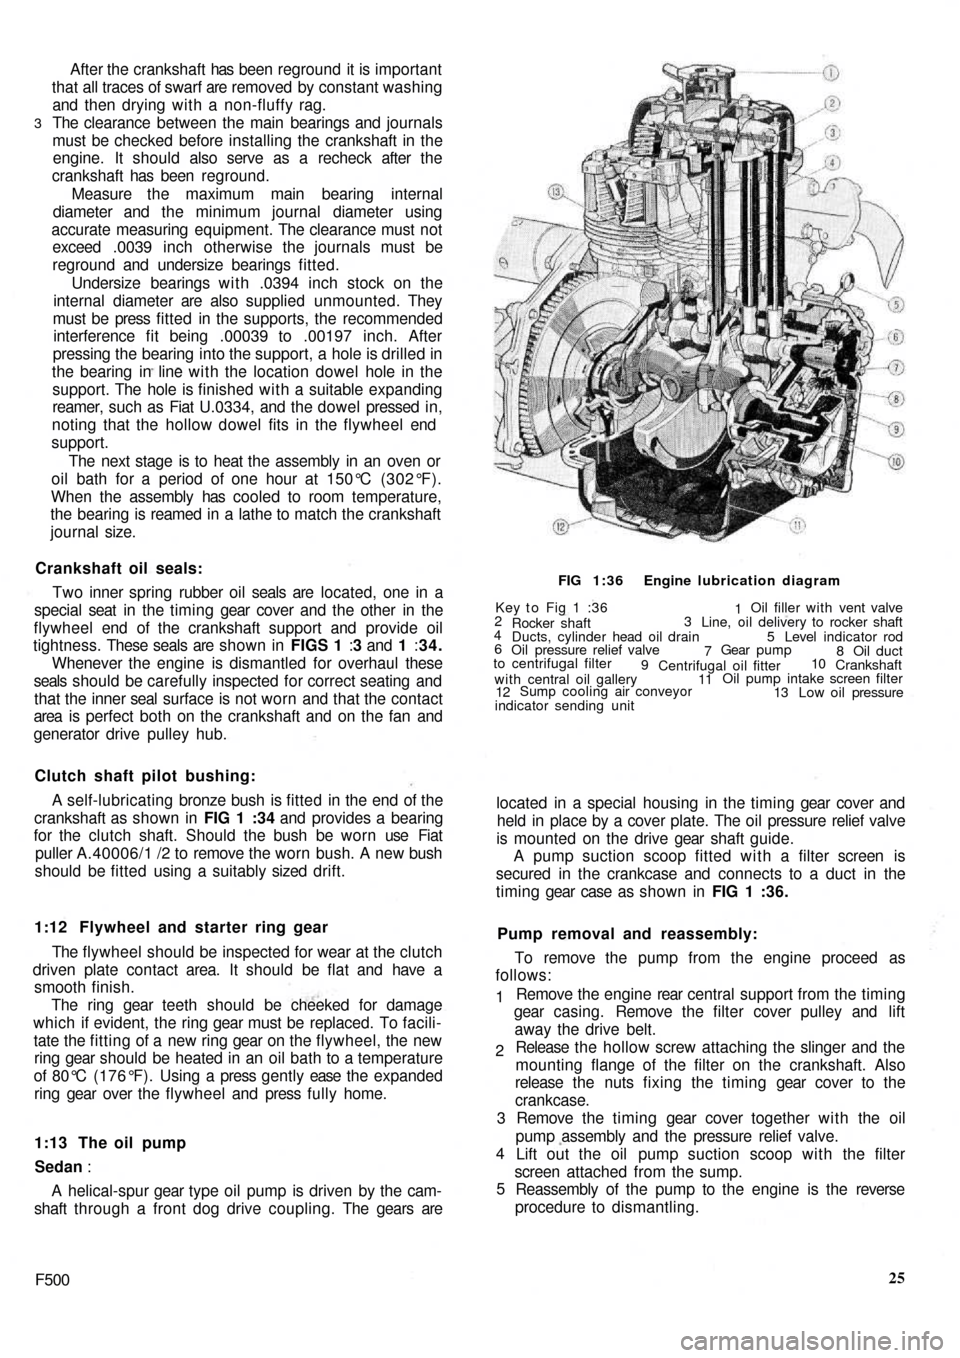 FIAT 500 1957 1.G Workshop Manual After the  crankshaft  has been reground  it is important
that all traces of swarf are removed  by constant washing
and then drying with a non-fluffy rag.
The clearance between the main bearings and j